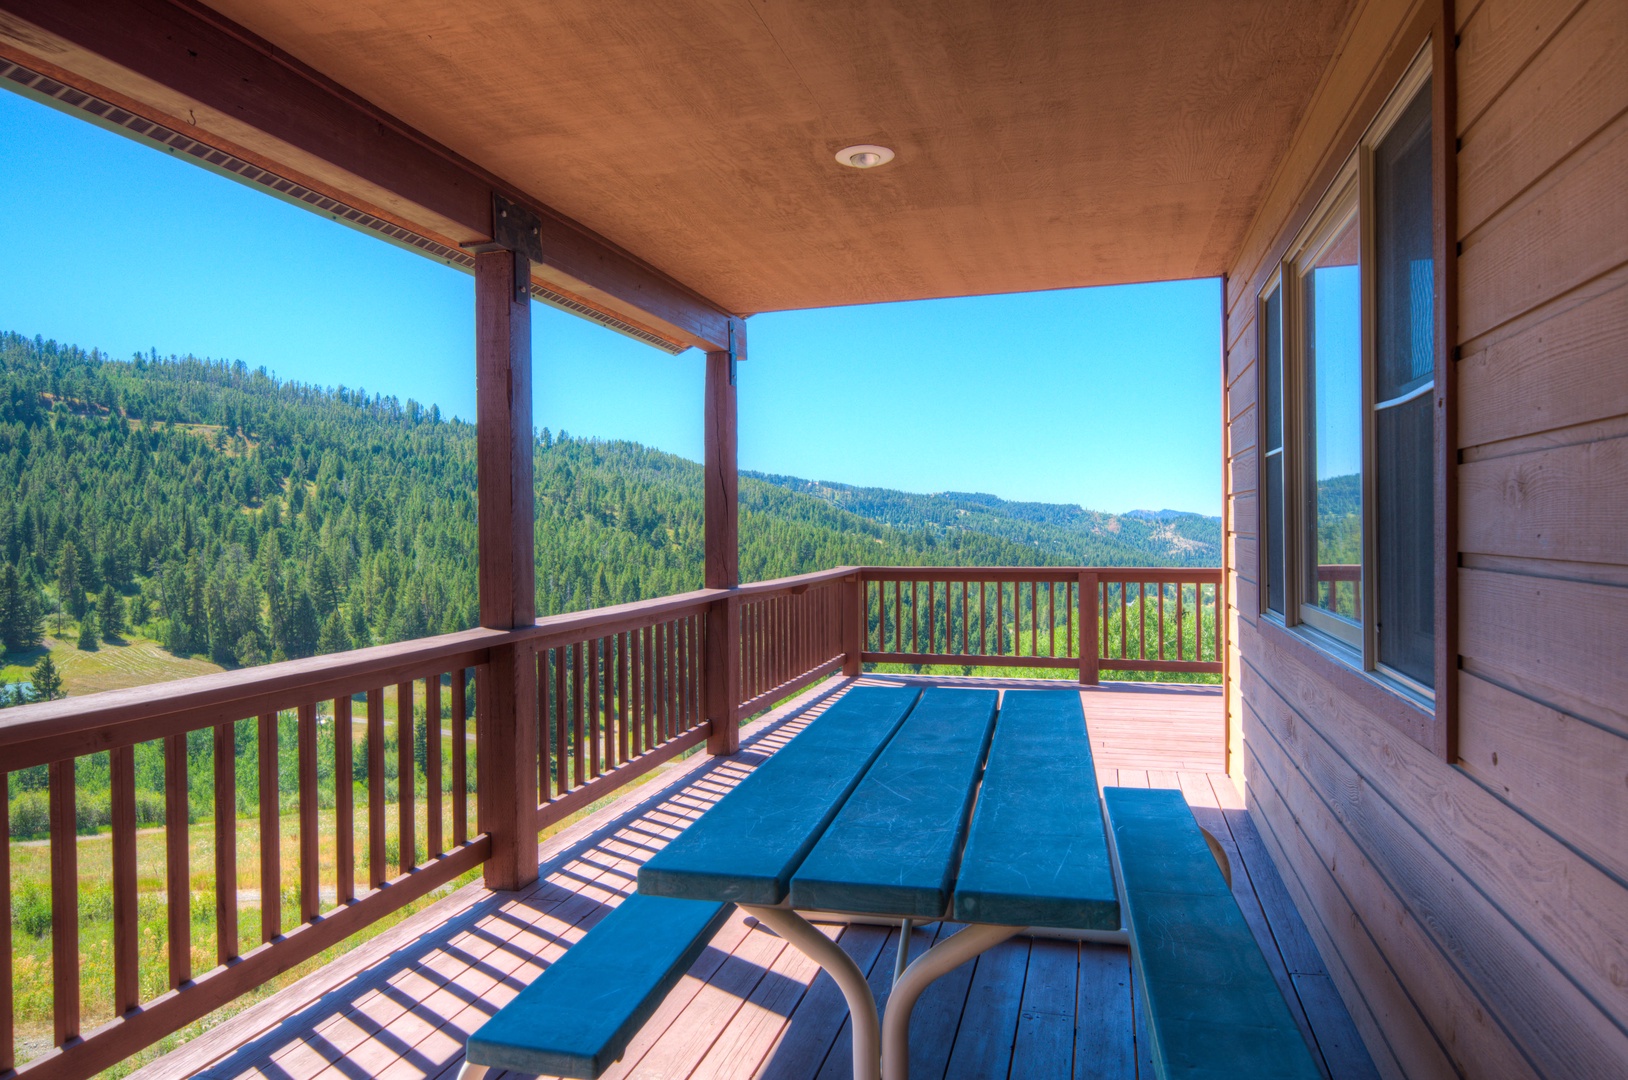 Bozeman Vacation Rentals, The Canyon Lookout - Lunch on the deck is a dream